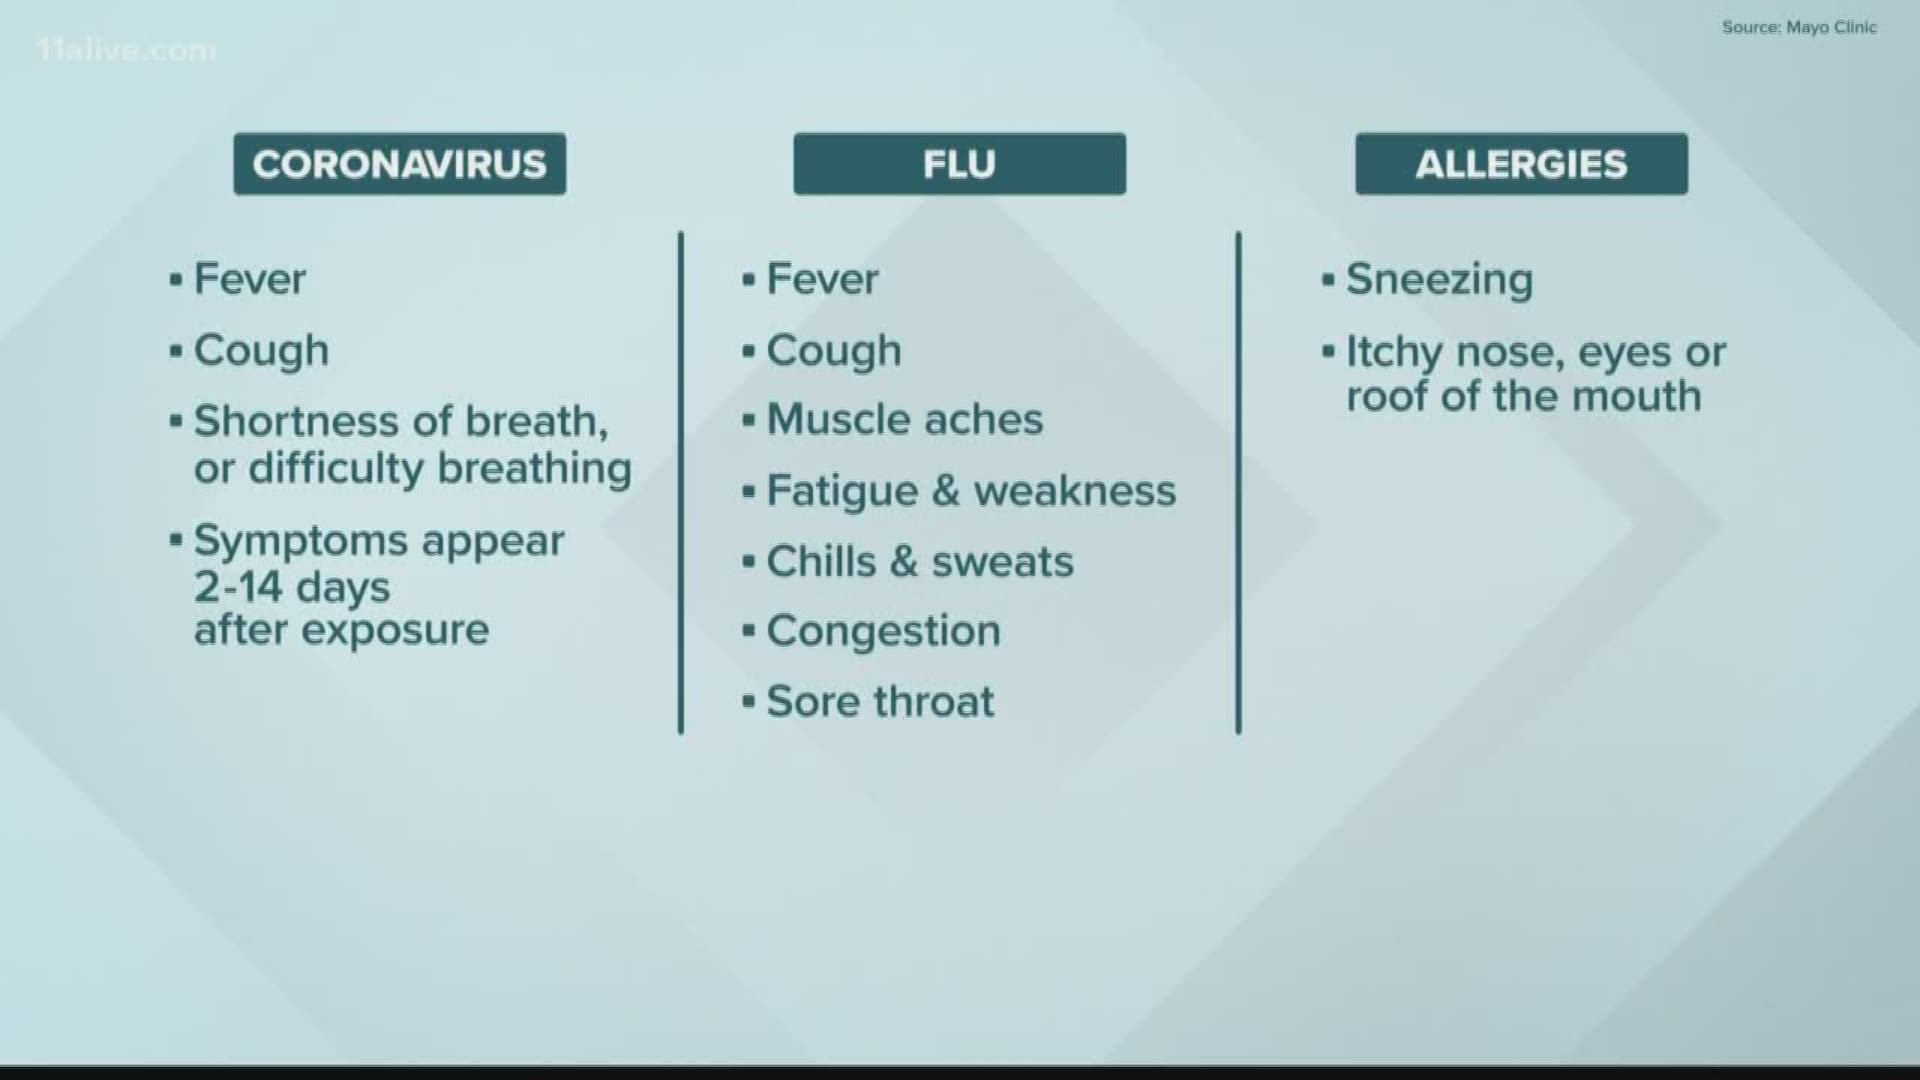 Here are the symptoms for each.